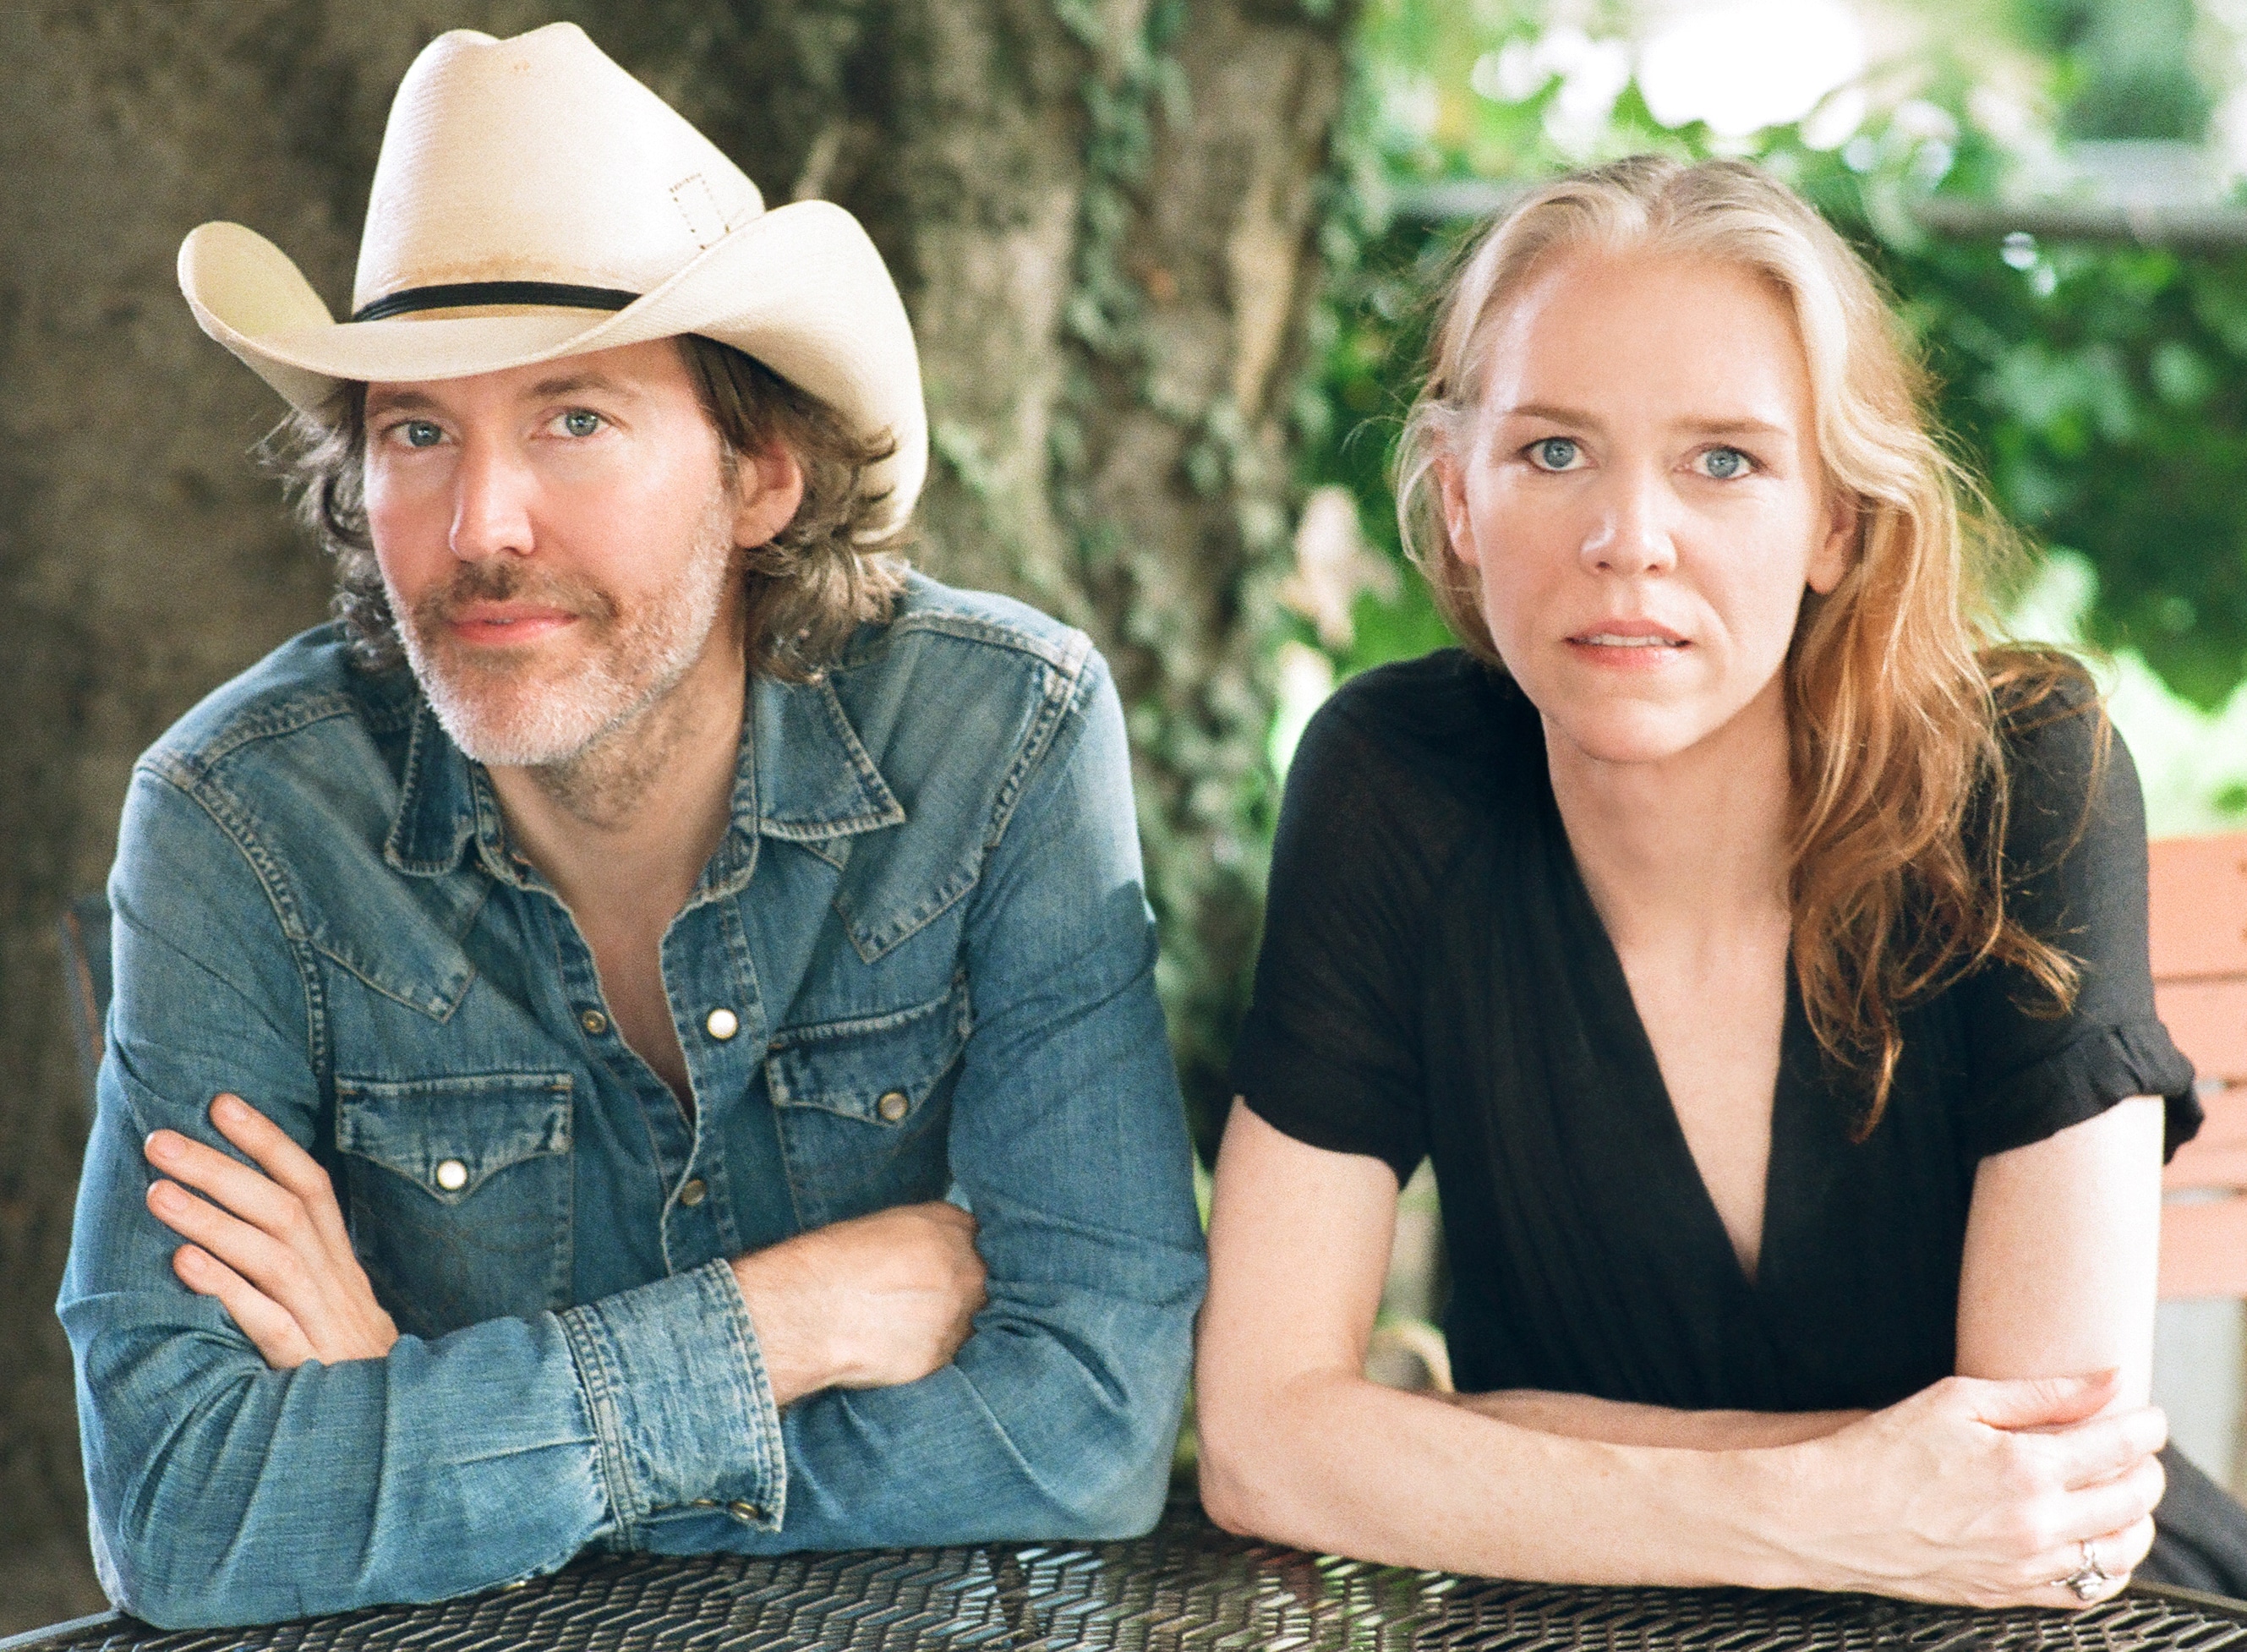 Grammys, 2021: Gillian Welch & David Rawlings Win Grammy for Best Folk Album for ‘All The Good Times.’